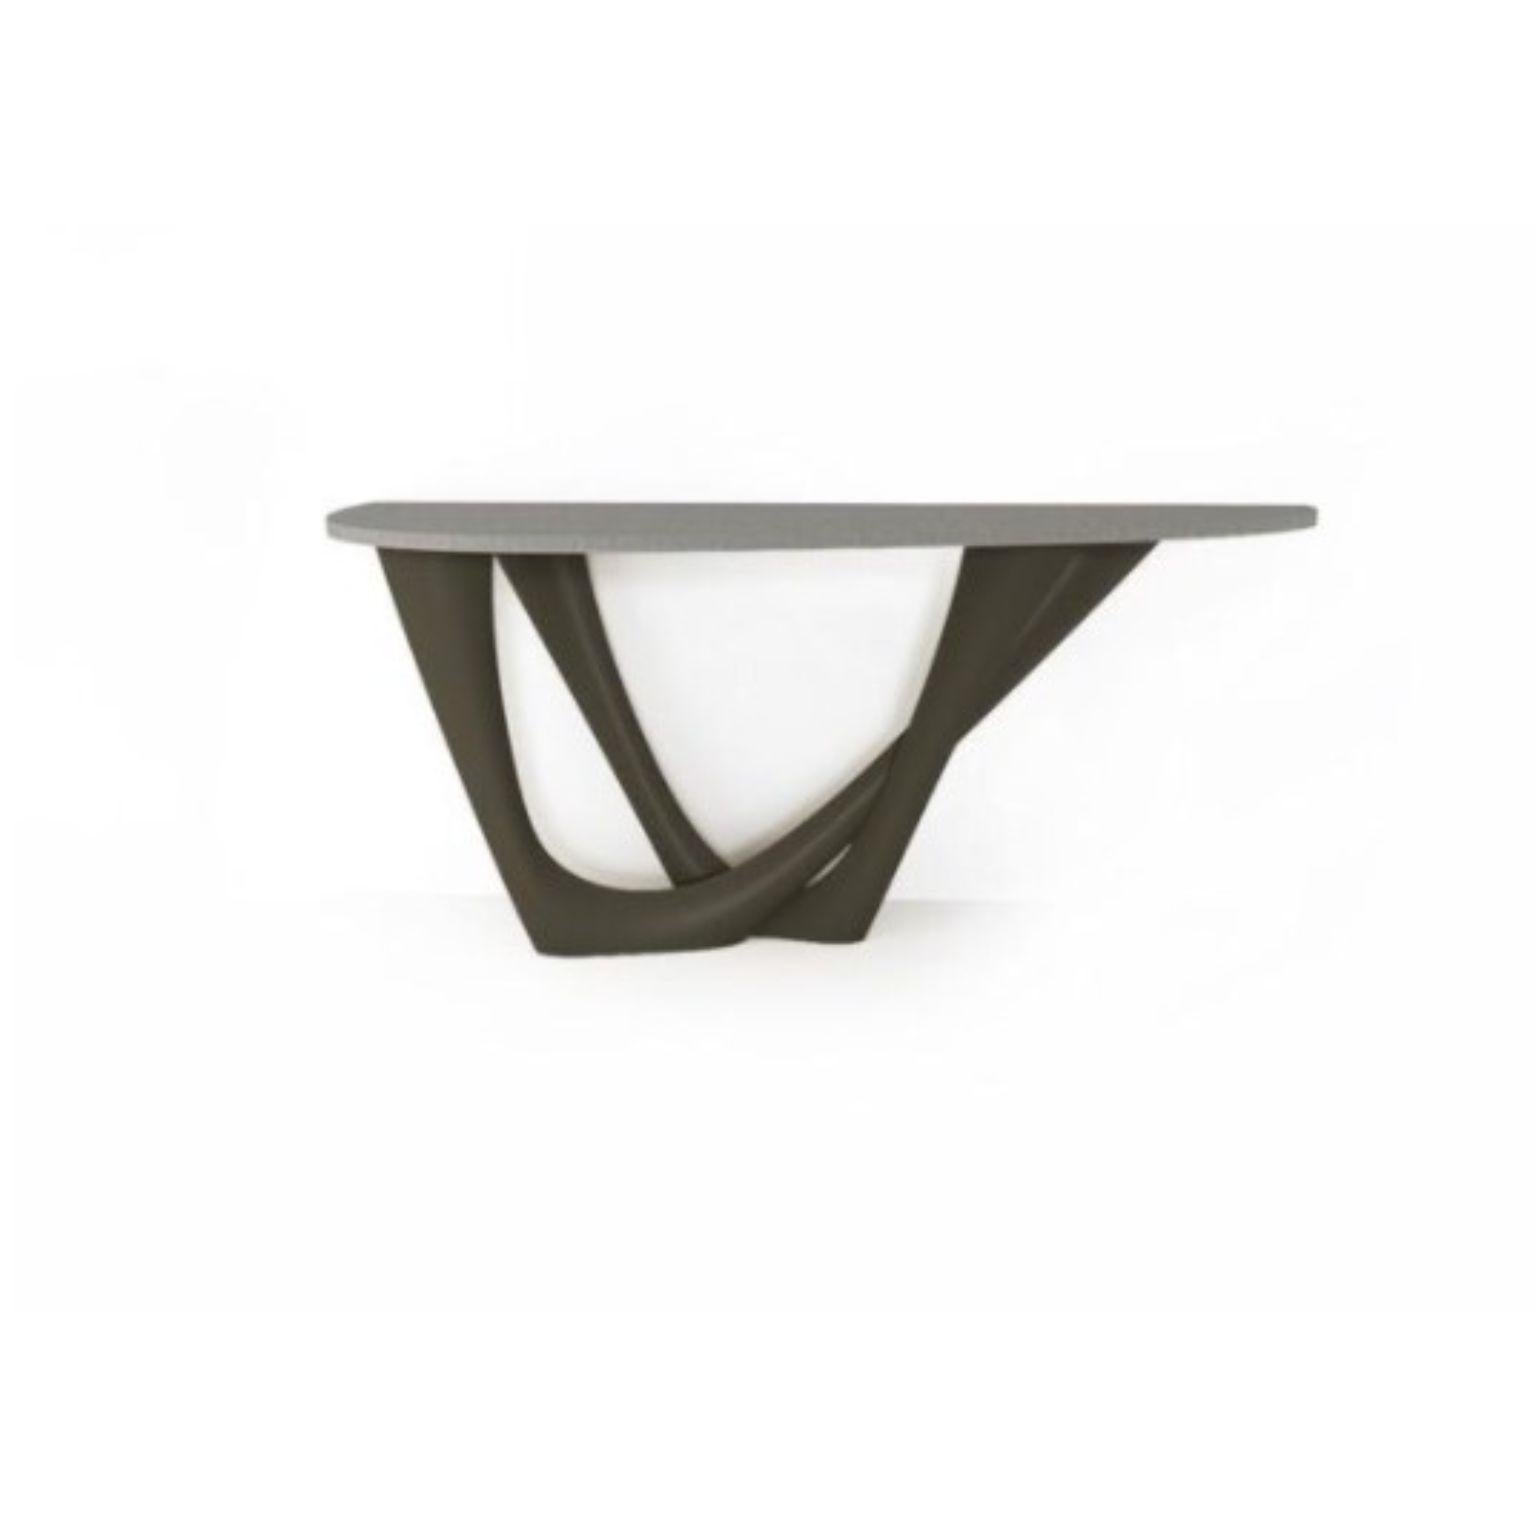 Umbra Grey G-Console Duo concrete top and steel base by Zieta
Dimensions: D 56 x W 168 x H 75 cm 
Material: Carbon steel, concrete.
Also available in different colors and dimensions.

G-Console is another bionic object in our collection. Created for